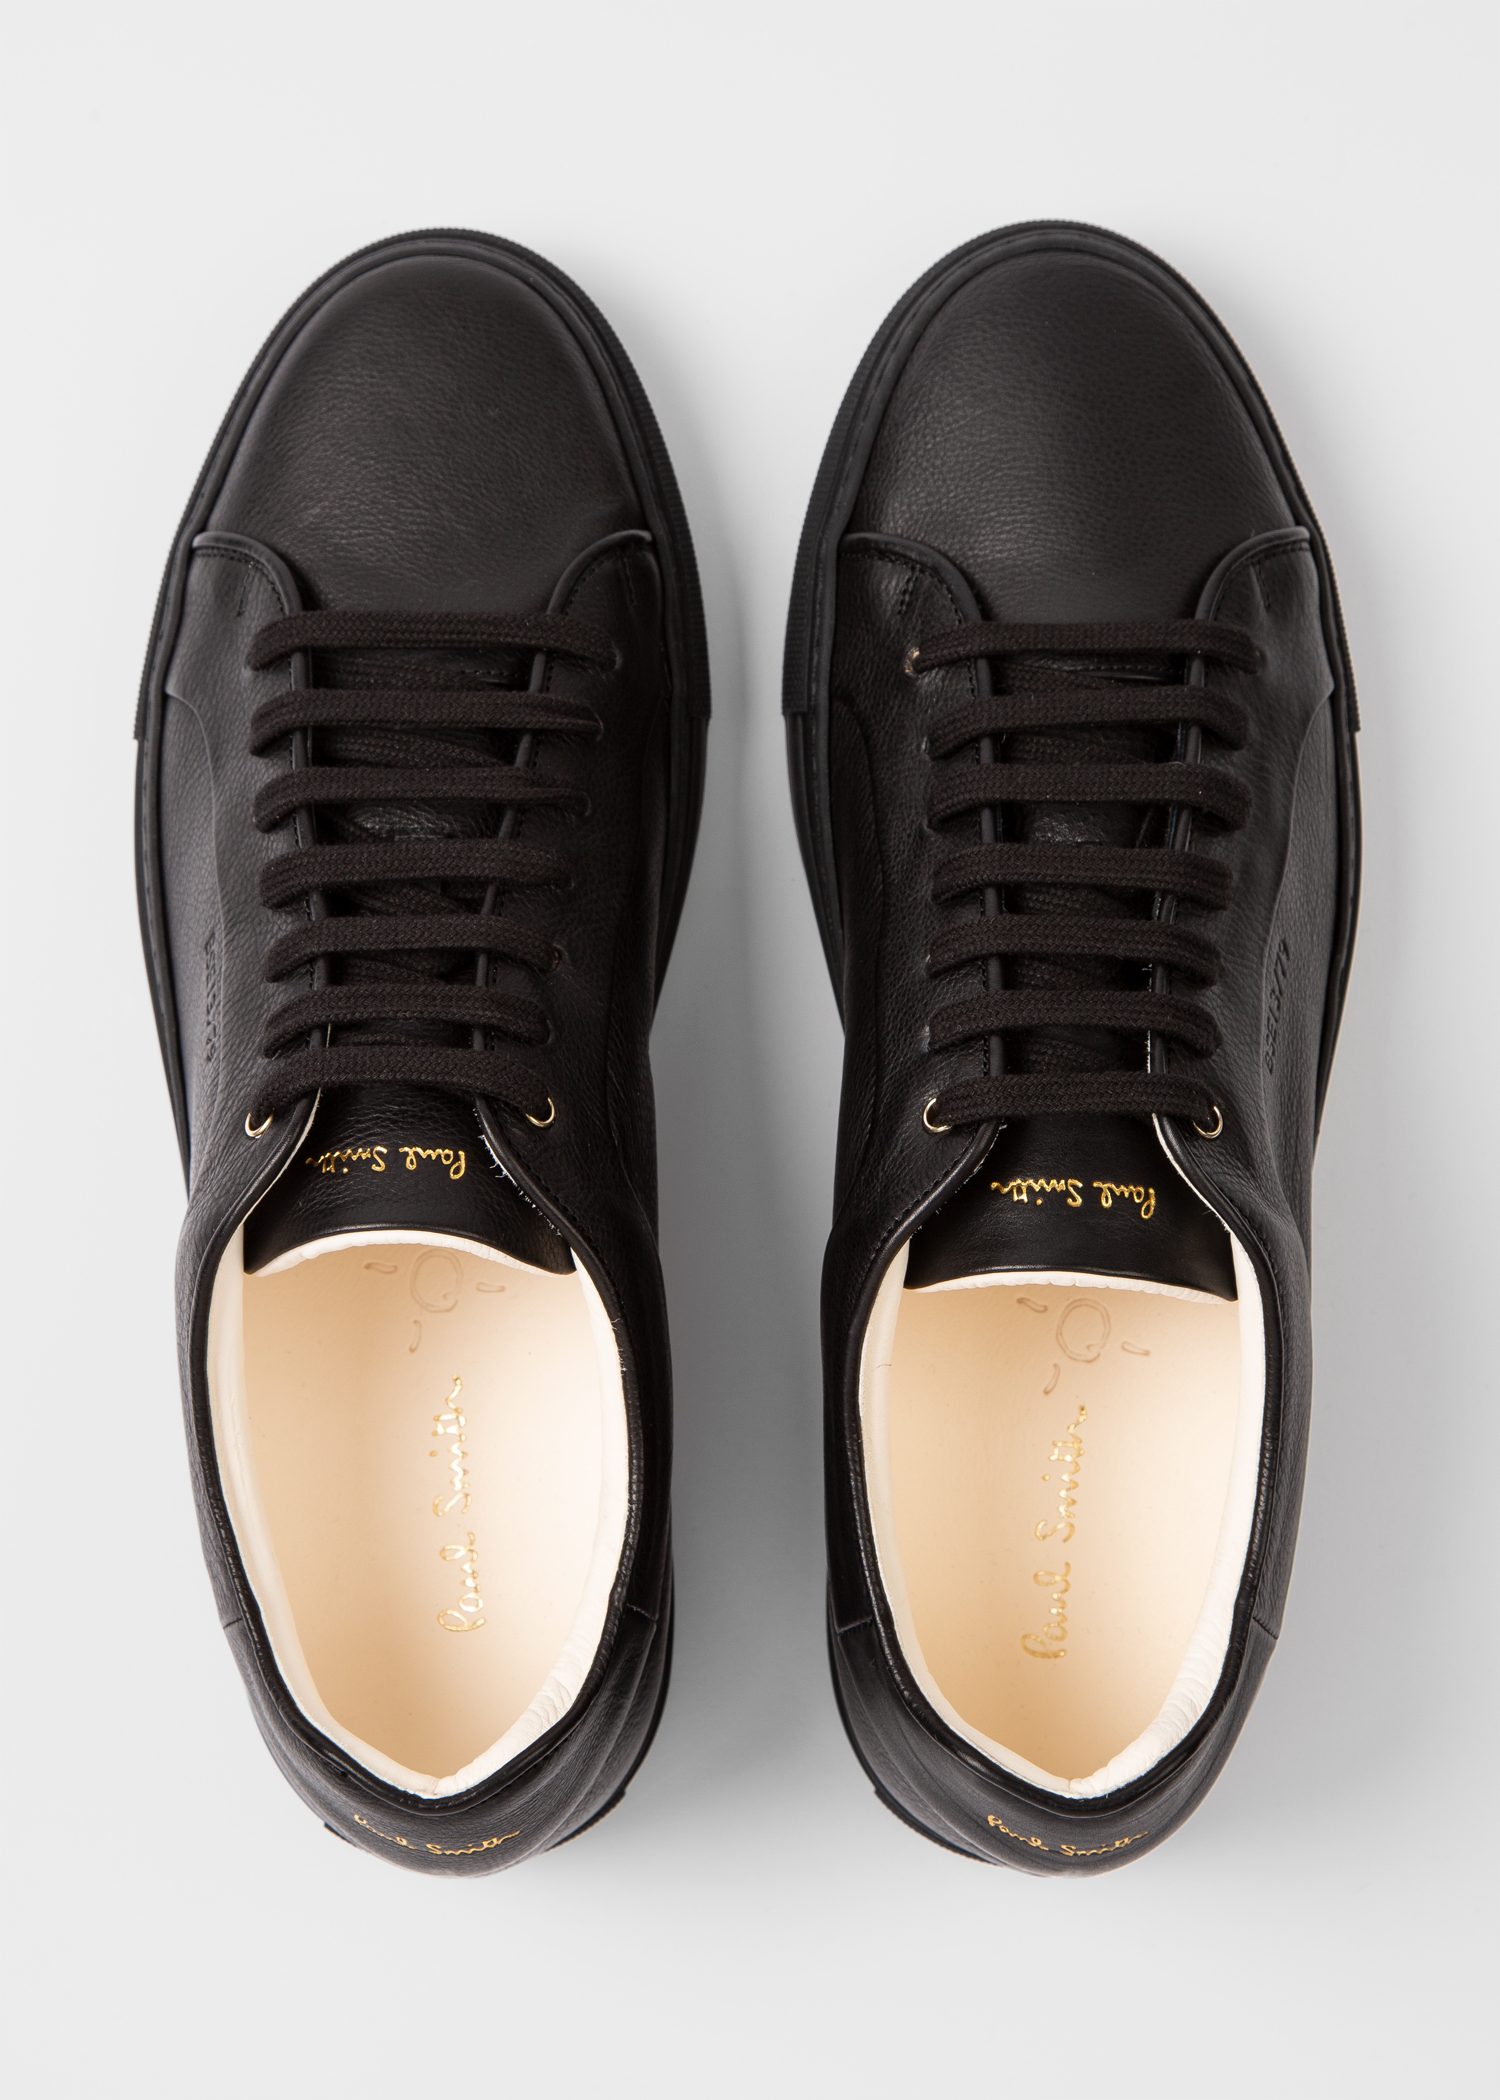 Designer Paul Smith Trainers for Men | Paul Smith